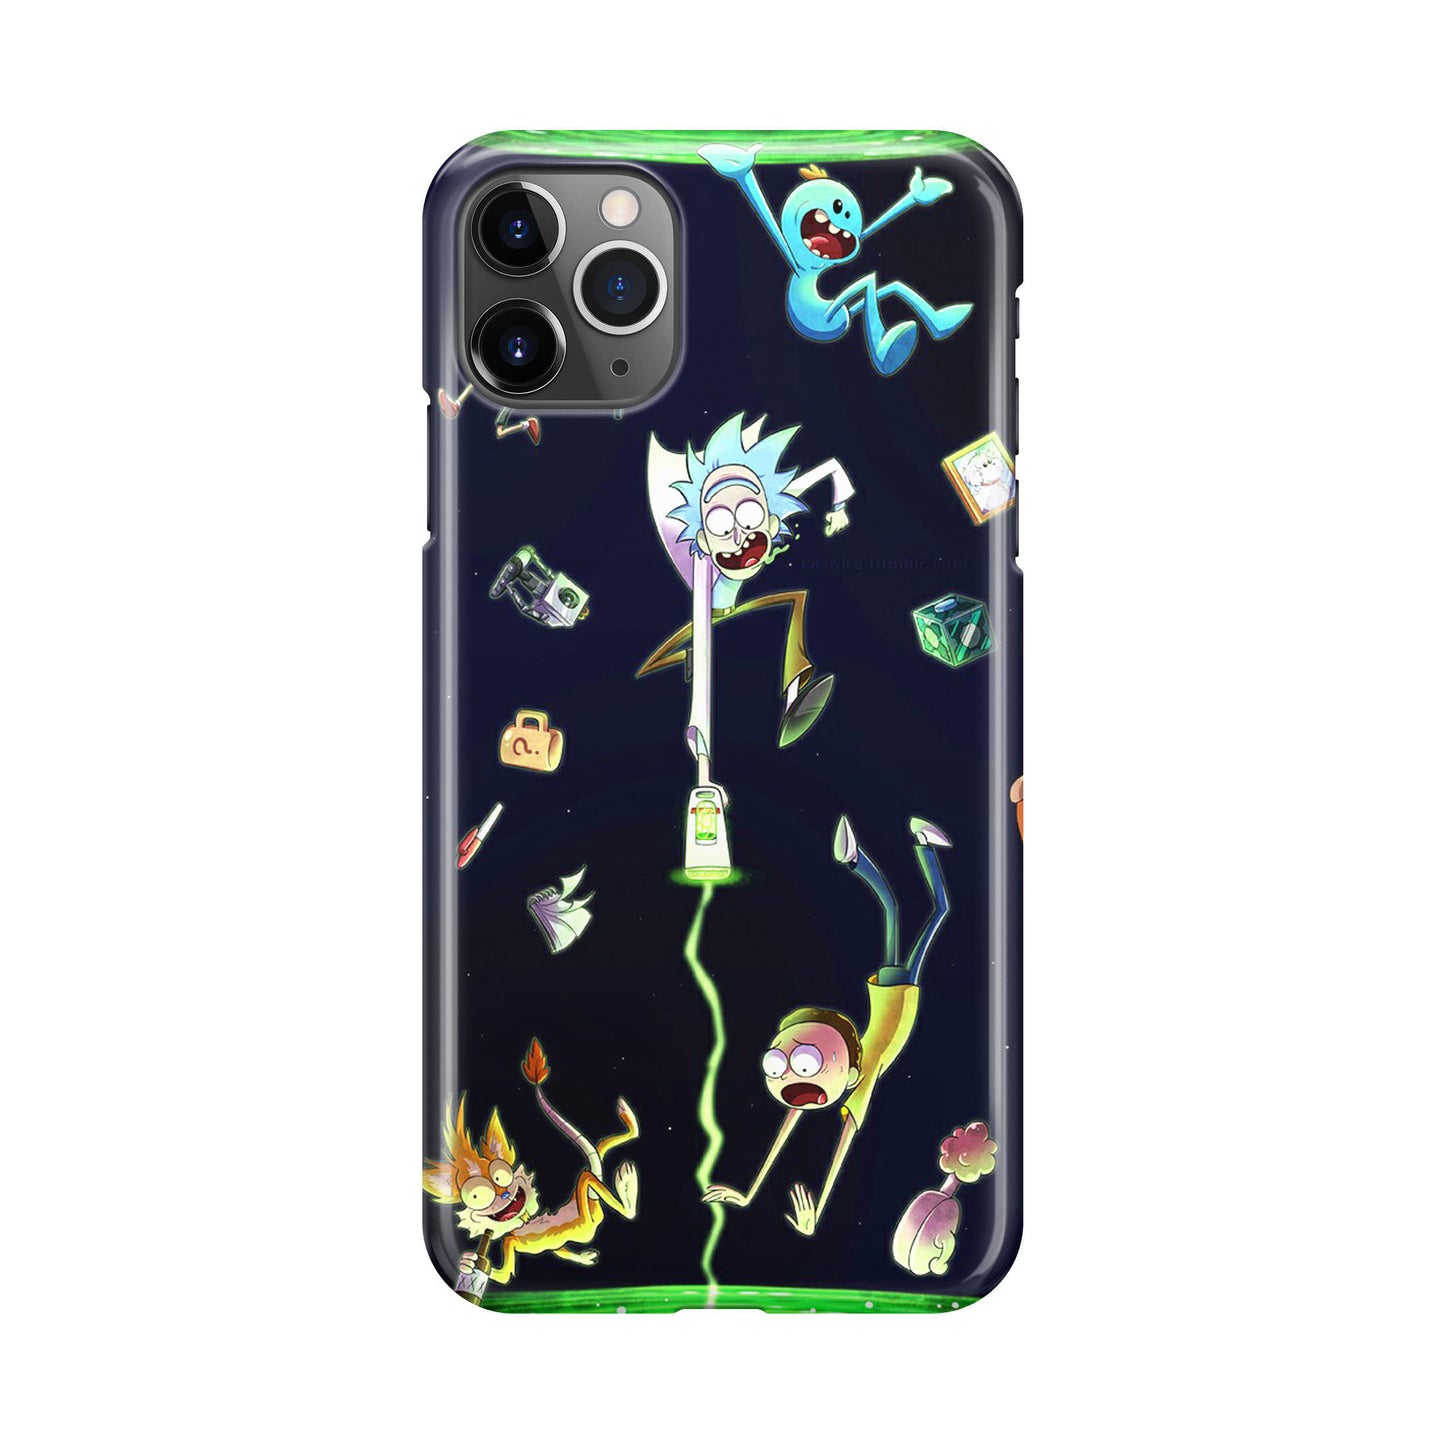 Rick And Morty Portal Fall iPhone 11 Pro Max Case